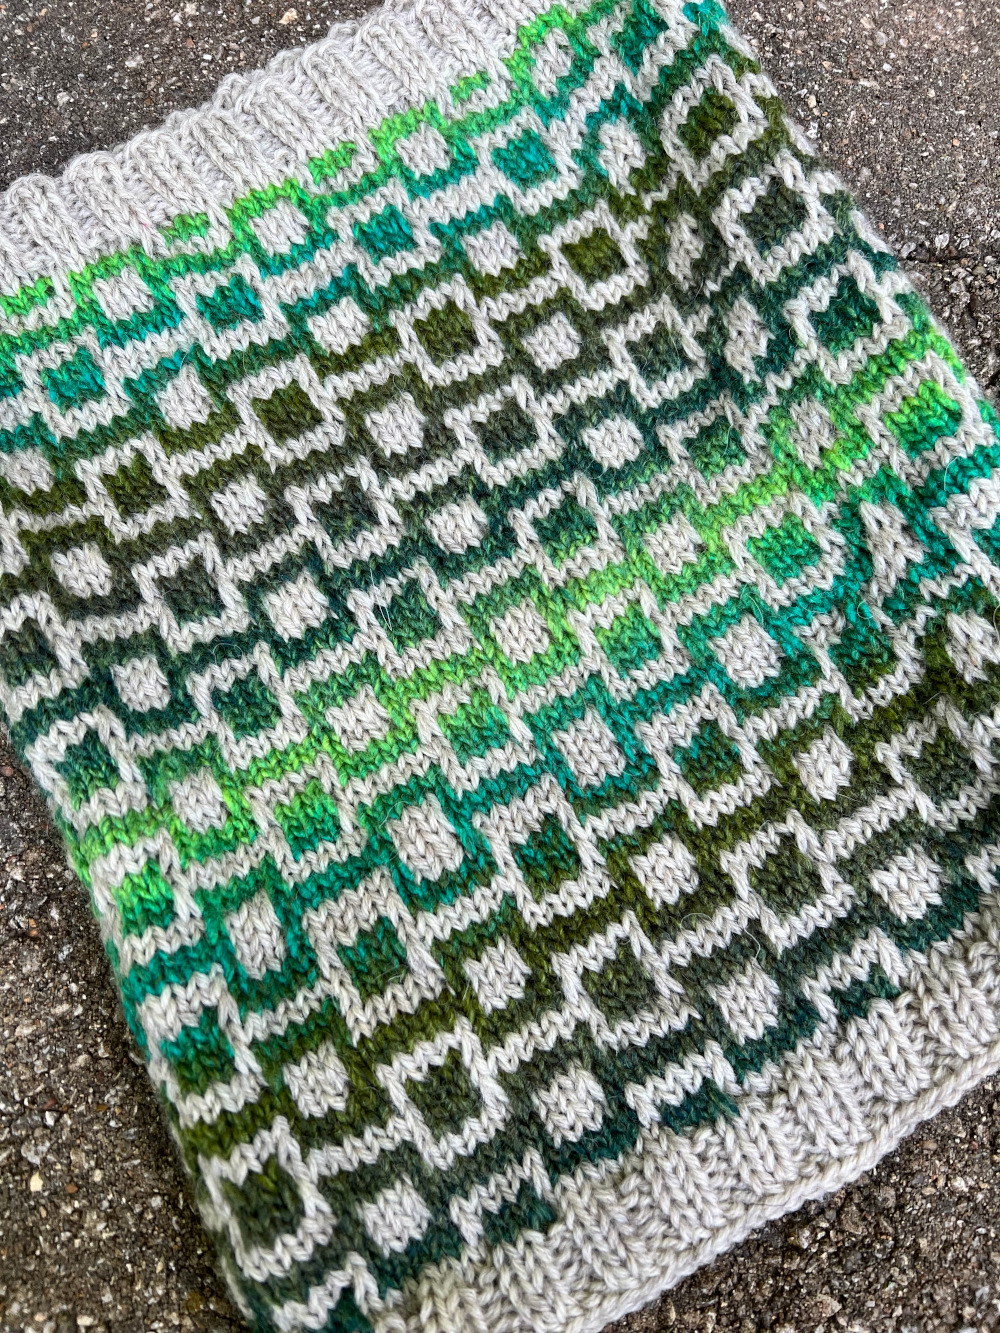 Easy Mosaic Cowl Knitting Pattern - Our Daily Craft